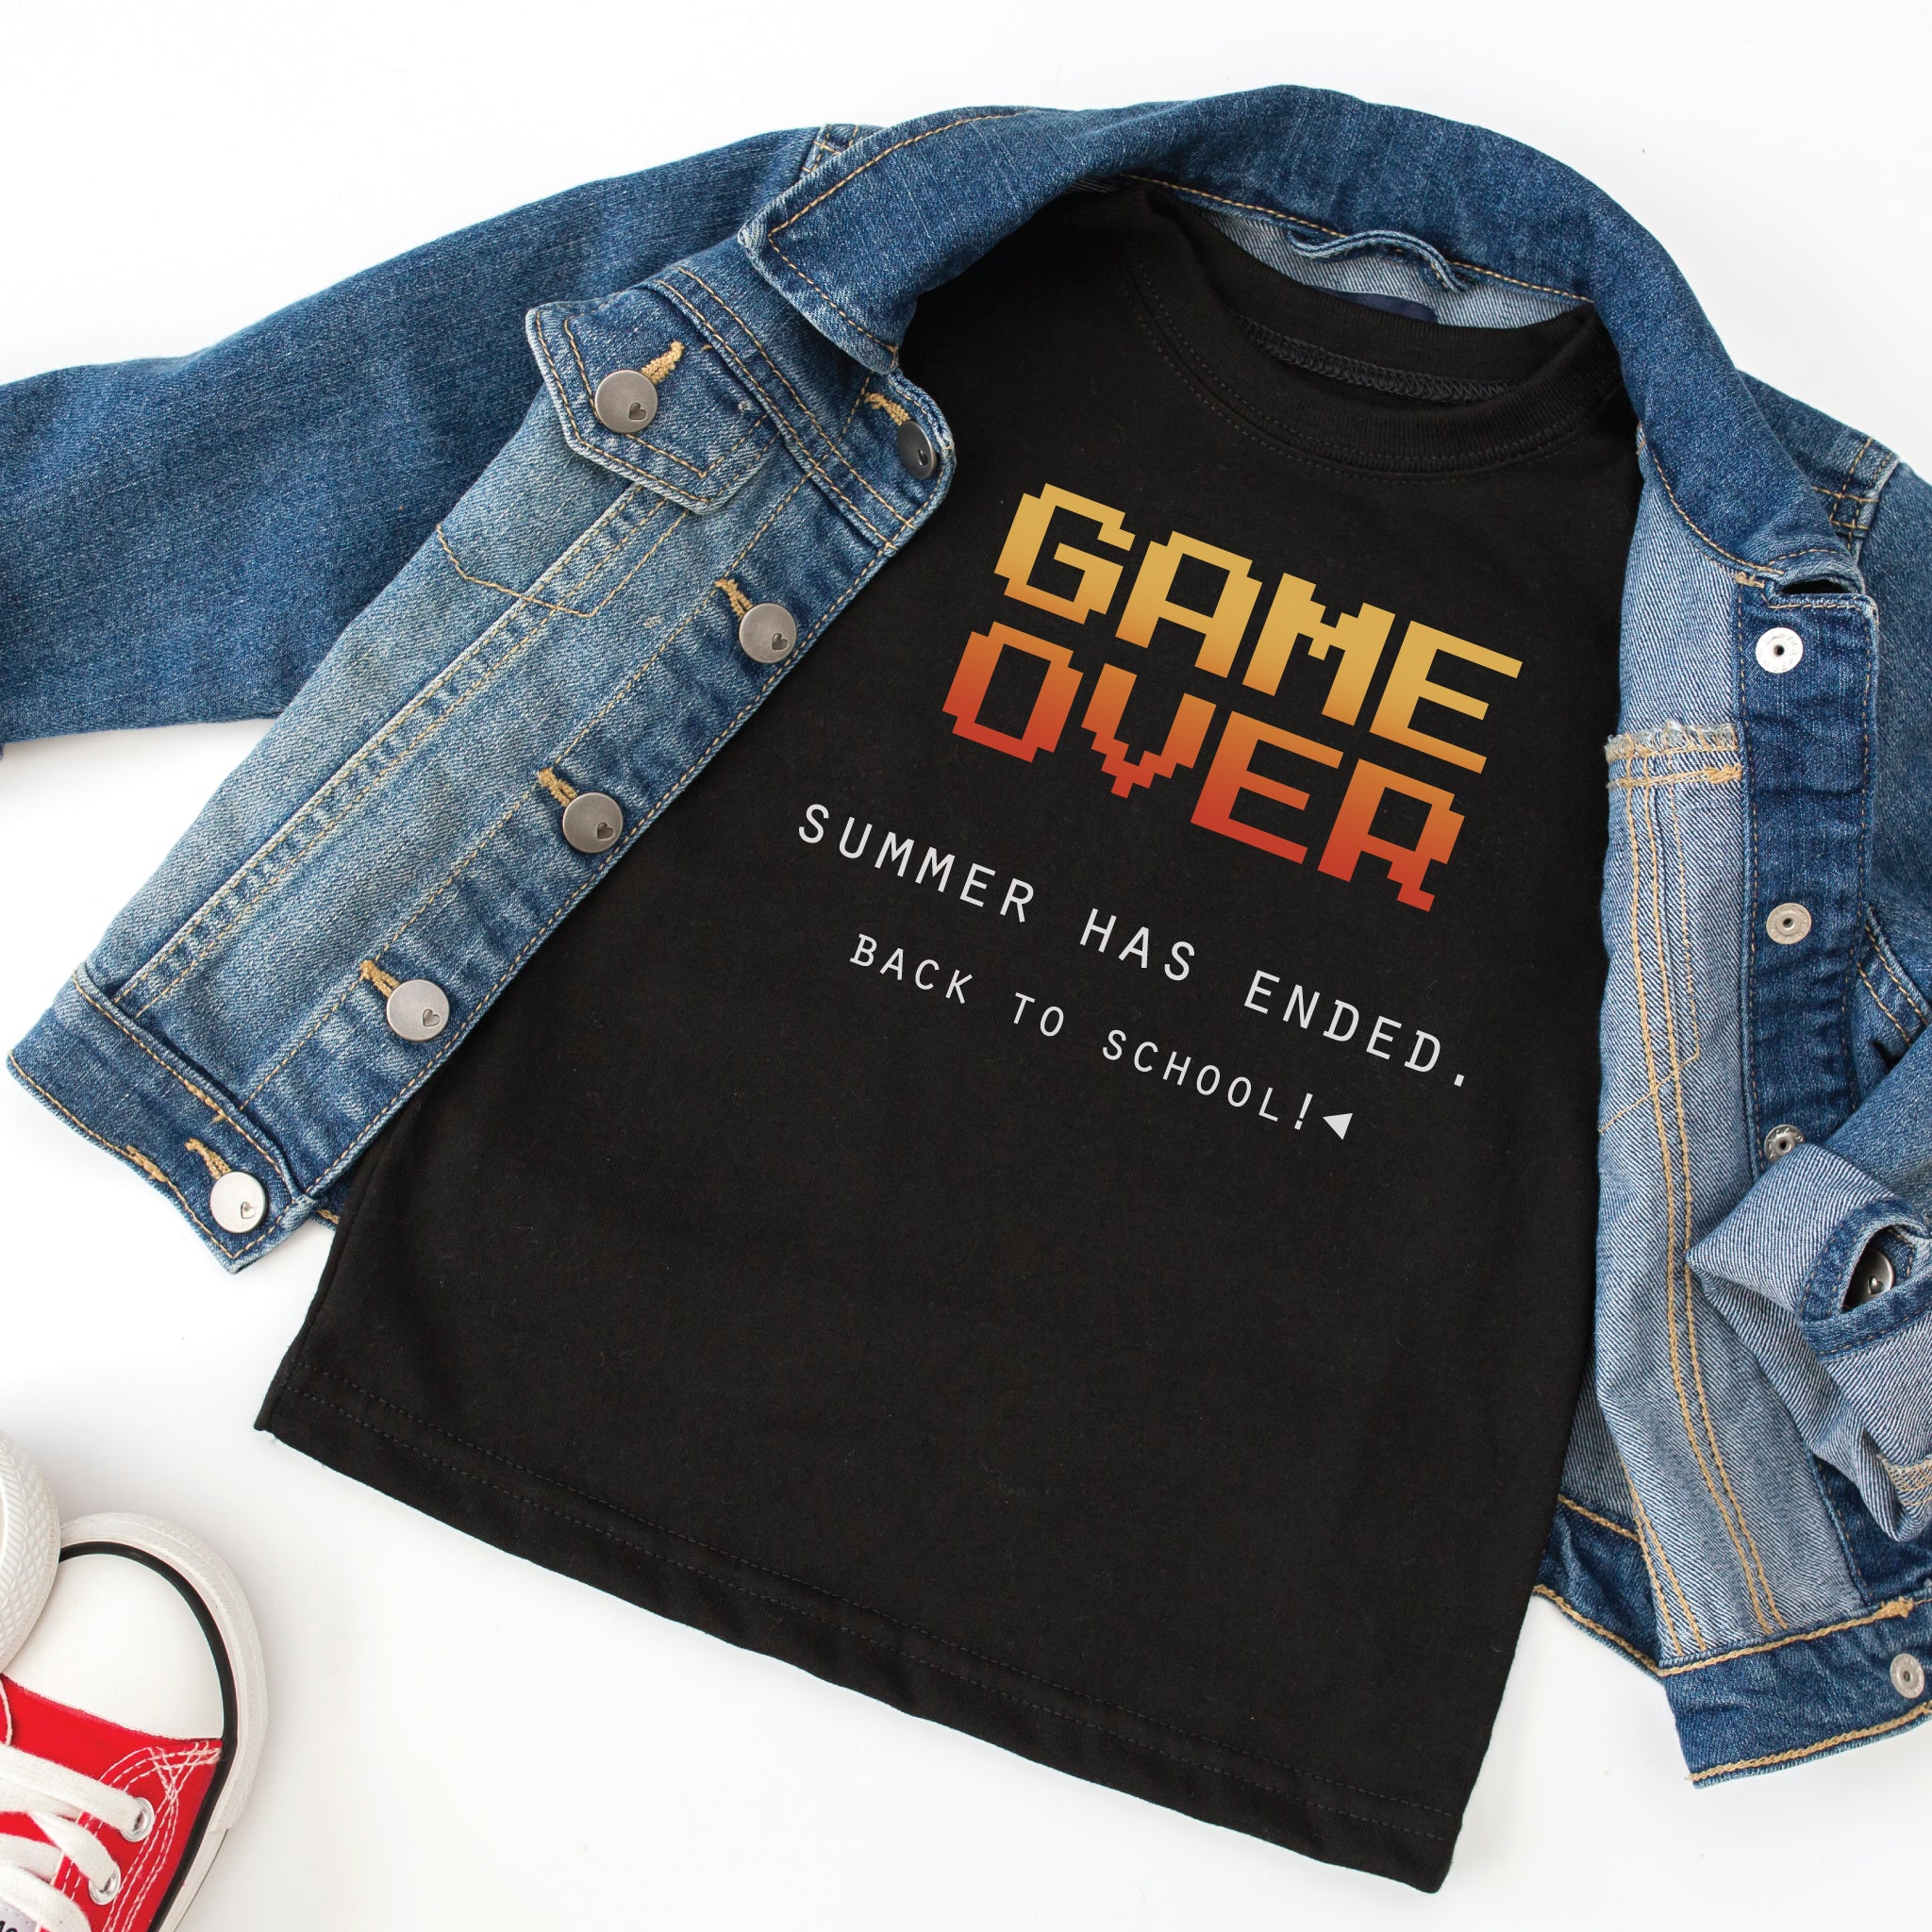 Game Over Back To School Shirt, Personalized Gamer Summer Is Over Shirt, Humorous Back To School Shirt, Gamer Shirt